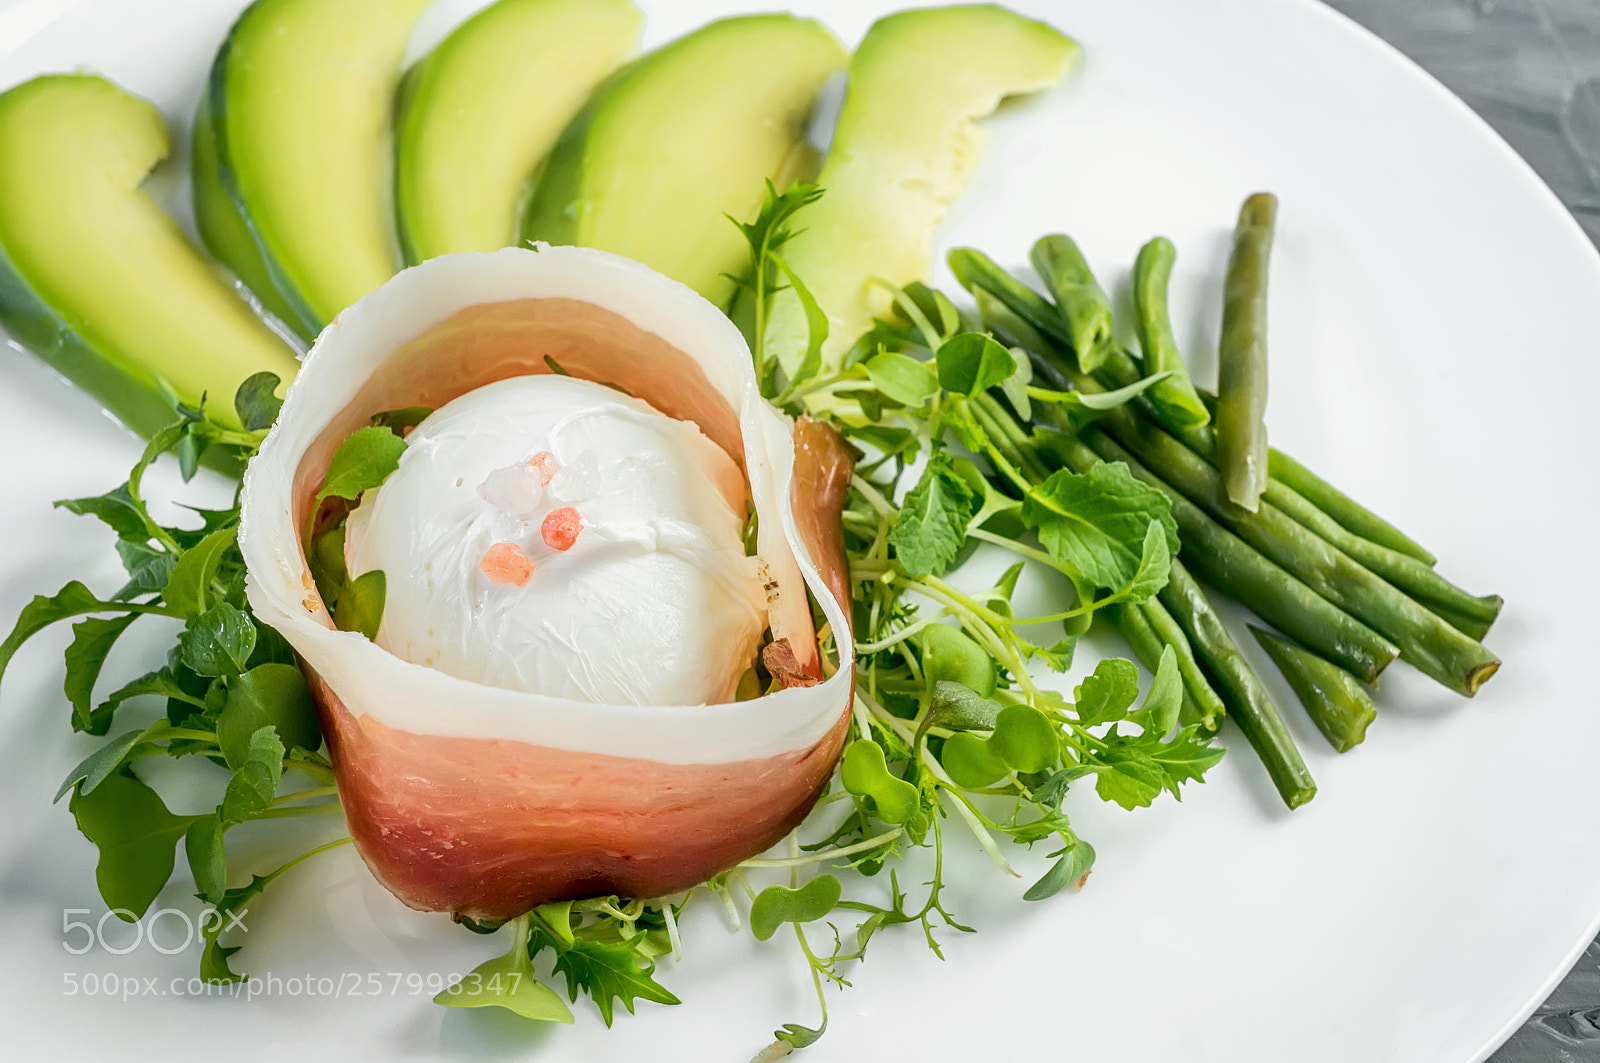 Sony Alpha NEX-6 sample photo. The poached egg in photography